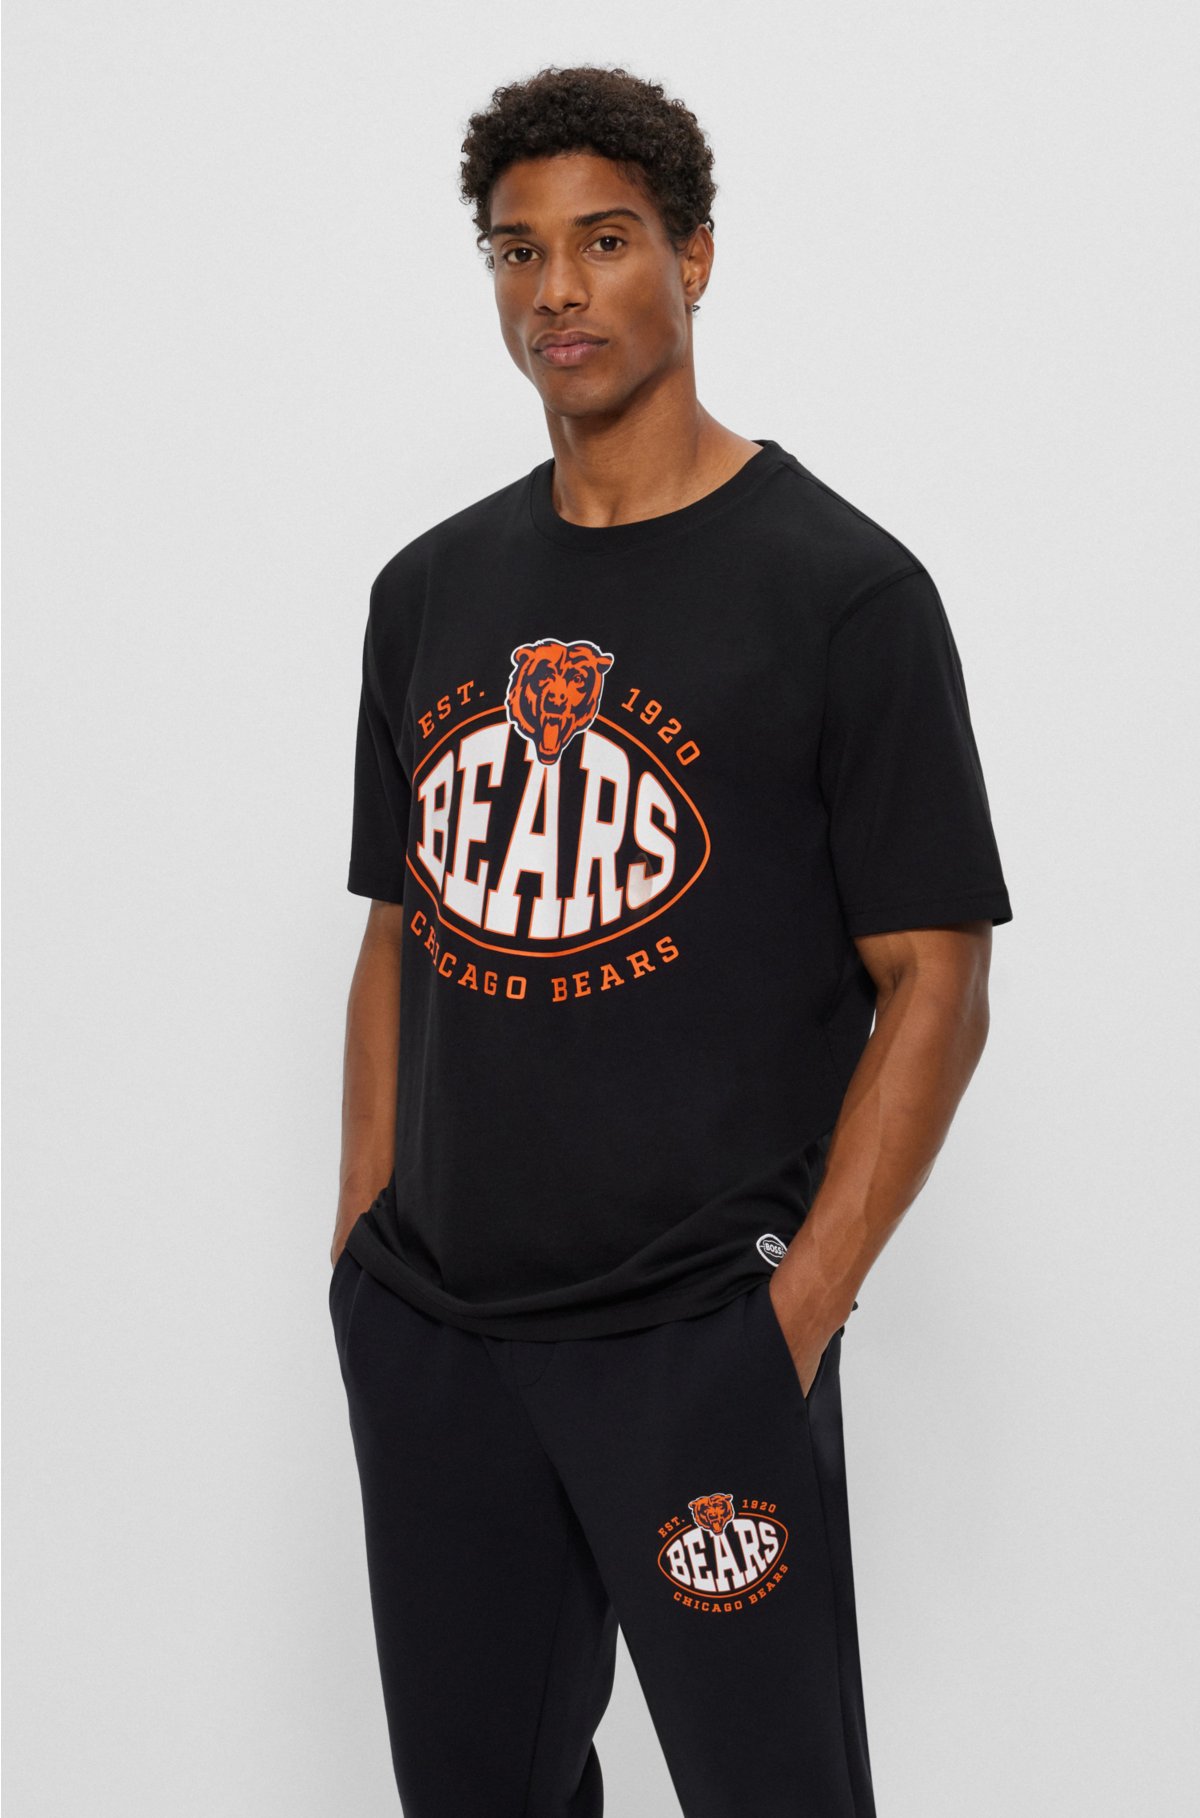  BOSS x NFL stretch-cotton T-shirt with collaborative branding, Bears